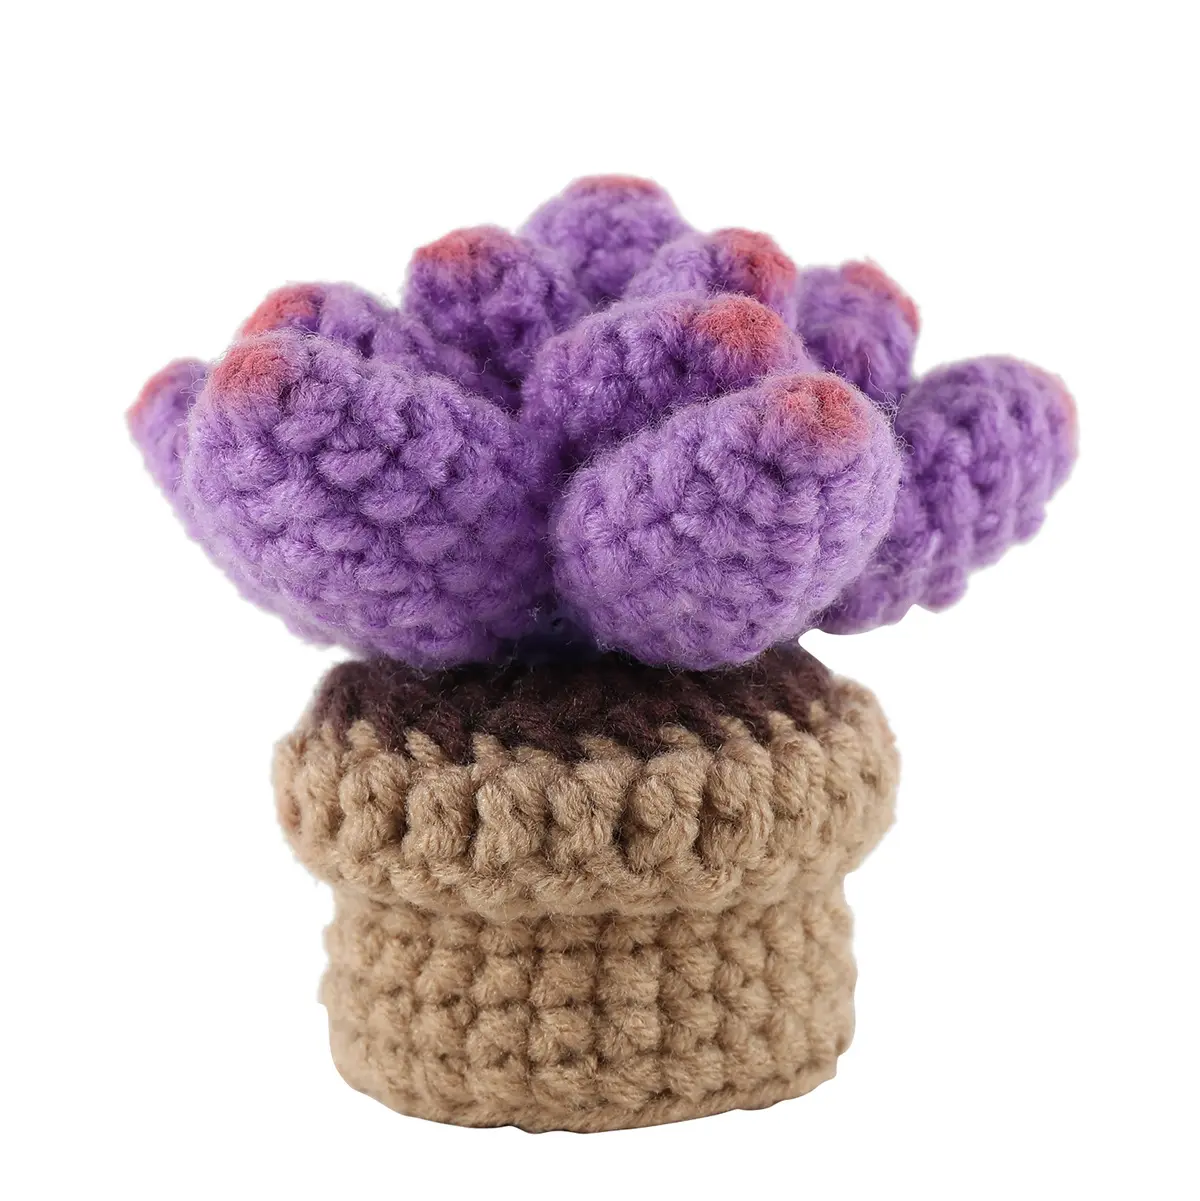 5pcs Green Plant Beautiful Cactus Crochet And Knitting Kits crochet Kit For Beginners With Yarn Set Kit Home Decoration Pattern